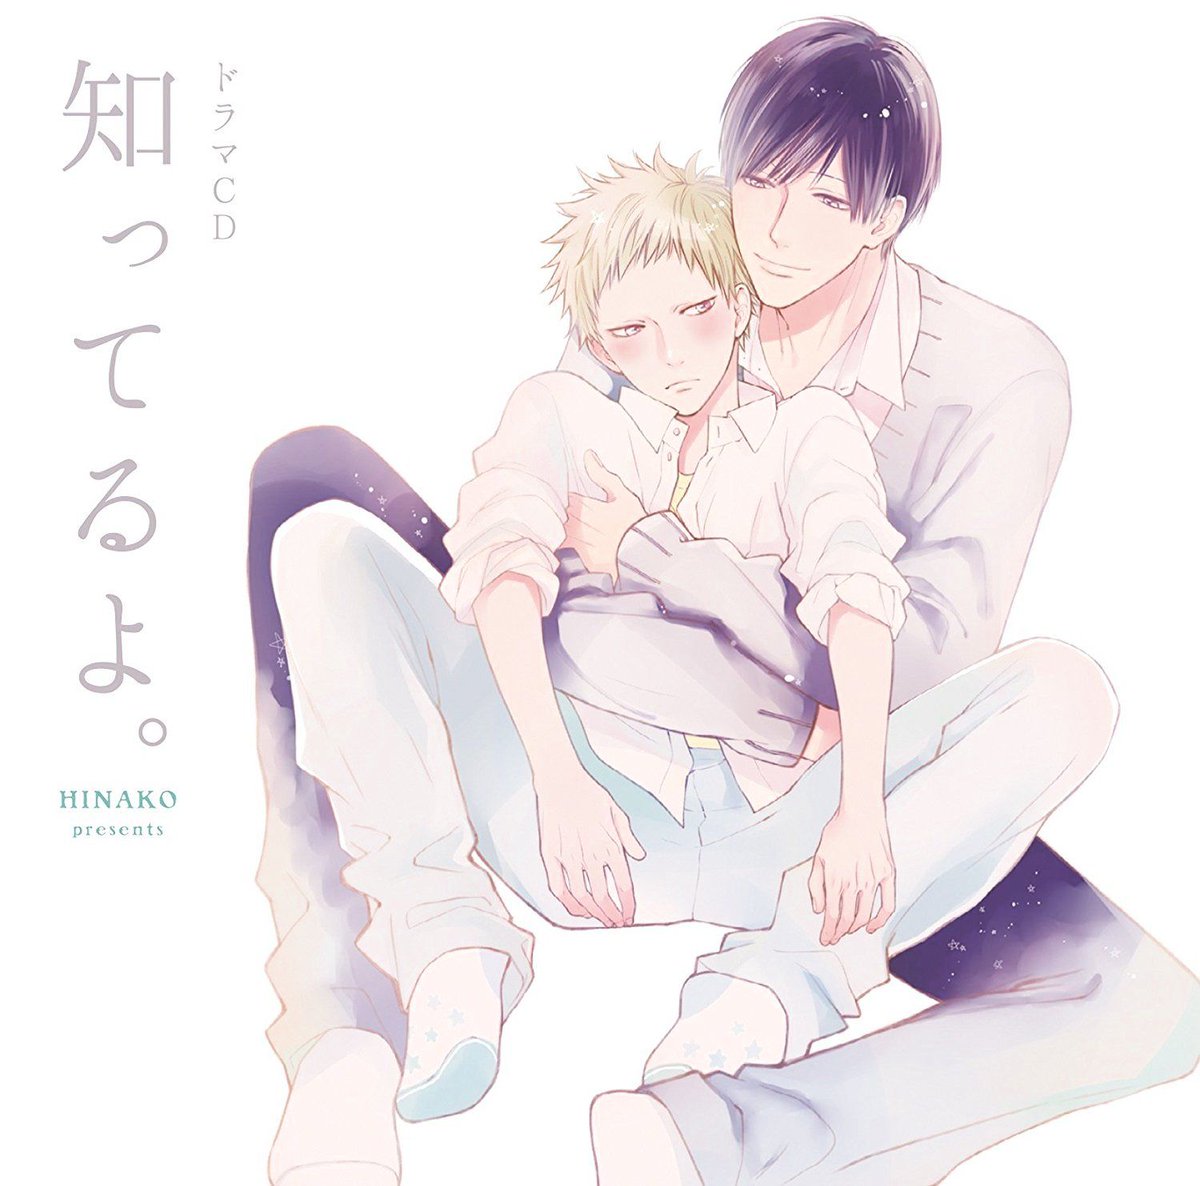 Today's  #yaoi is, "Shitteru Yo" Sawahata smiles to avoid getting involved. His life seemed boring until he finds Hoshizaki glaring at him.The no-eyebrows-face intriques him, what does Hoshizaki want?Hoshizaki and his bro are adorable~ ❀^❀  #BL  #cute